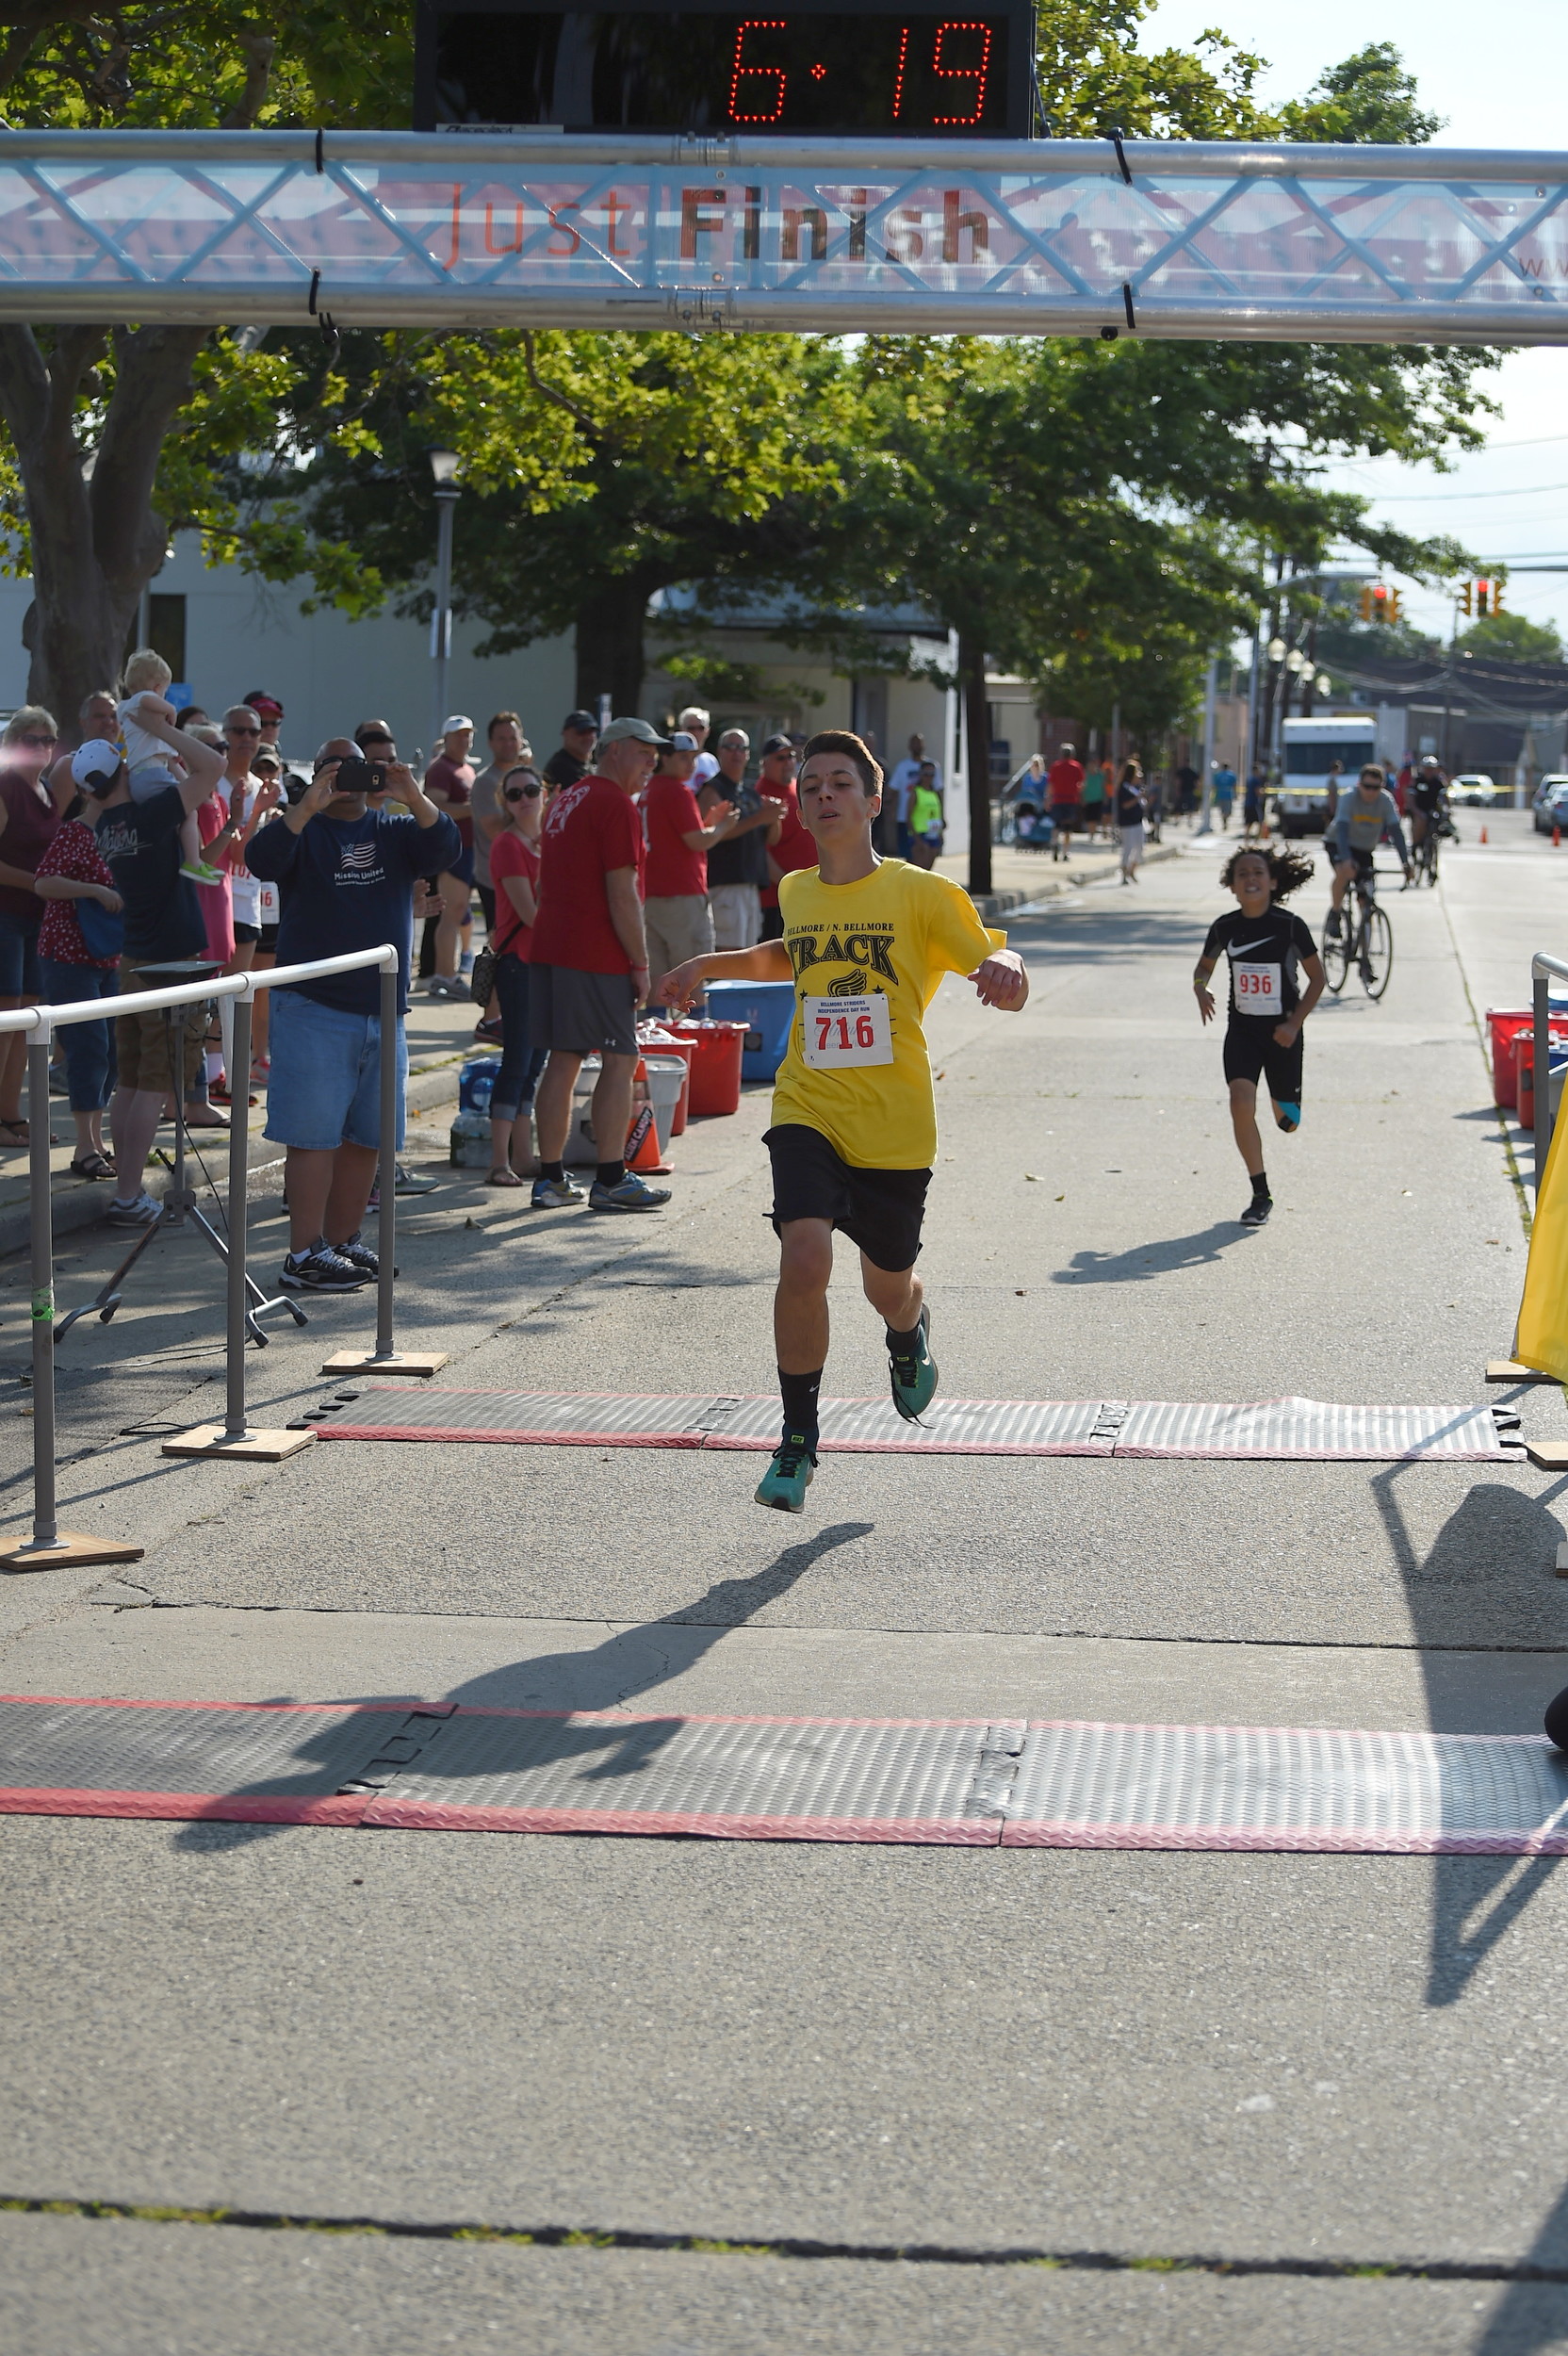 Anthony Scotto, 13, of North Bellmore, crossed the finish line in the one-mile race.